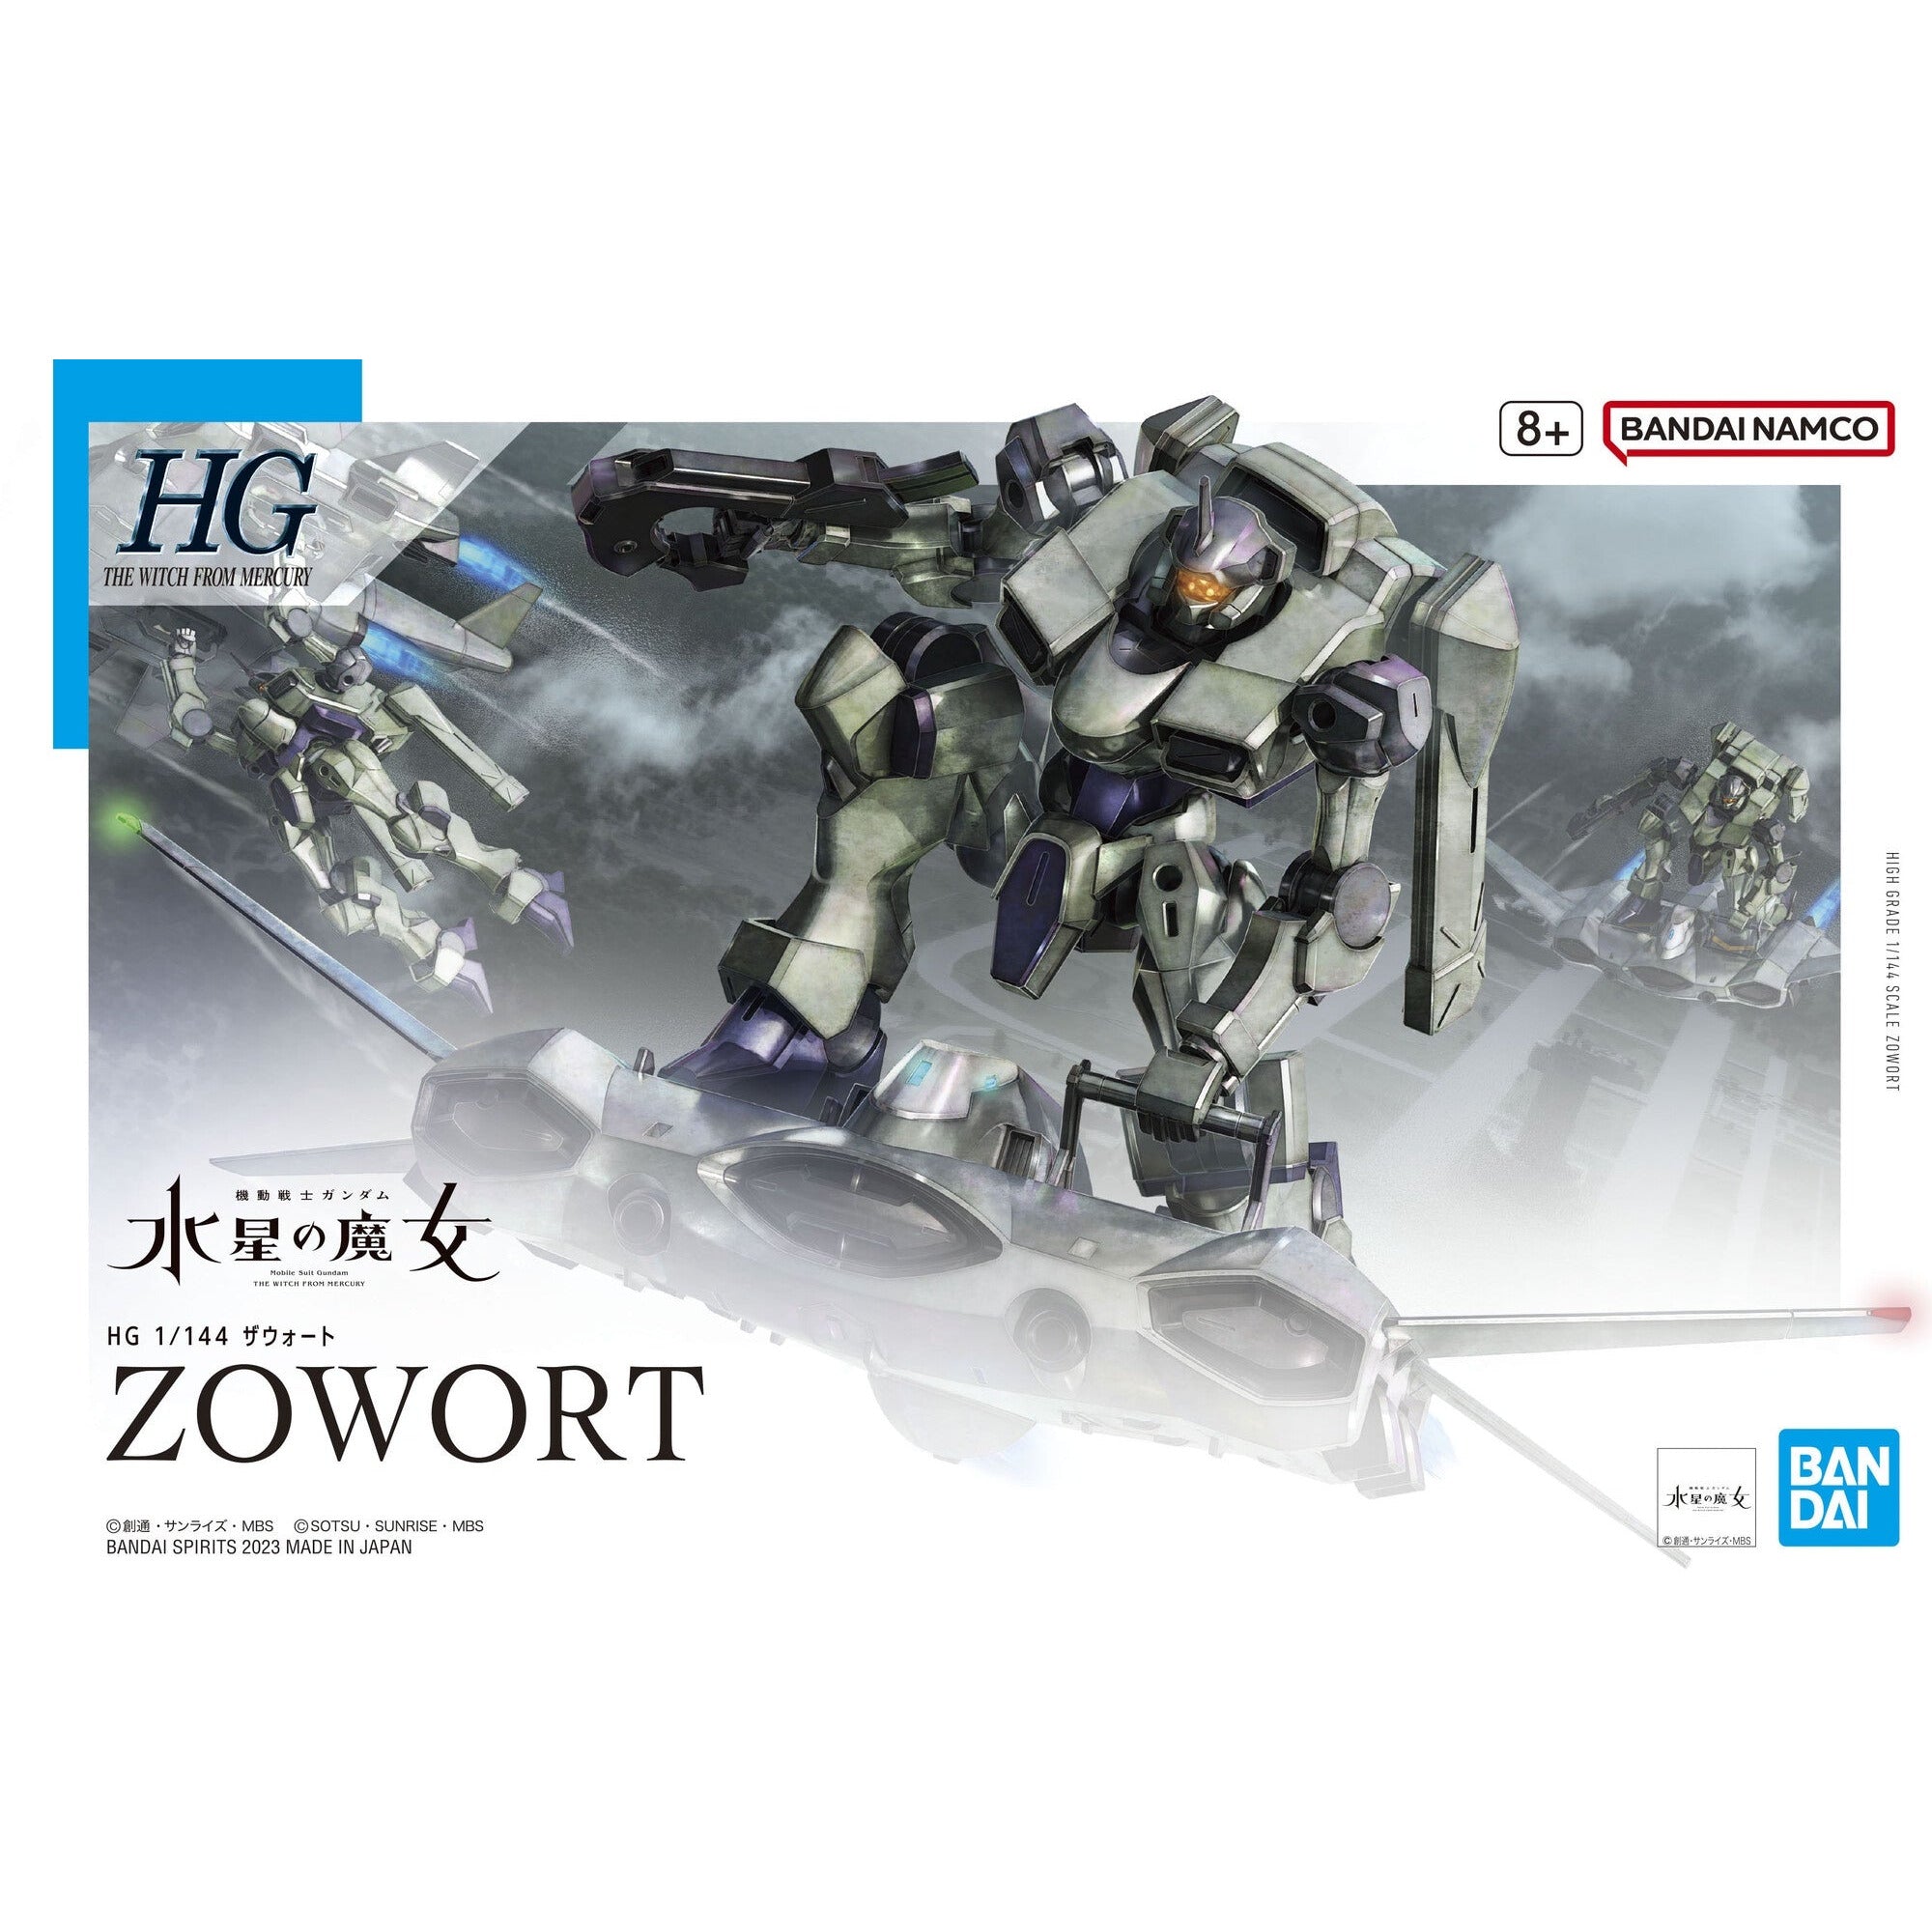 HG 1/144 The Witch From Mercury #14 F/D-19 Zowort #5065020 by Bandai